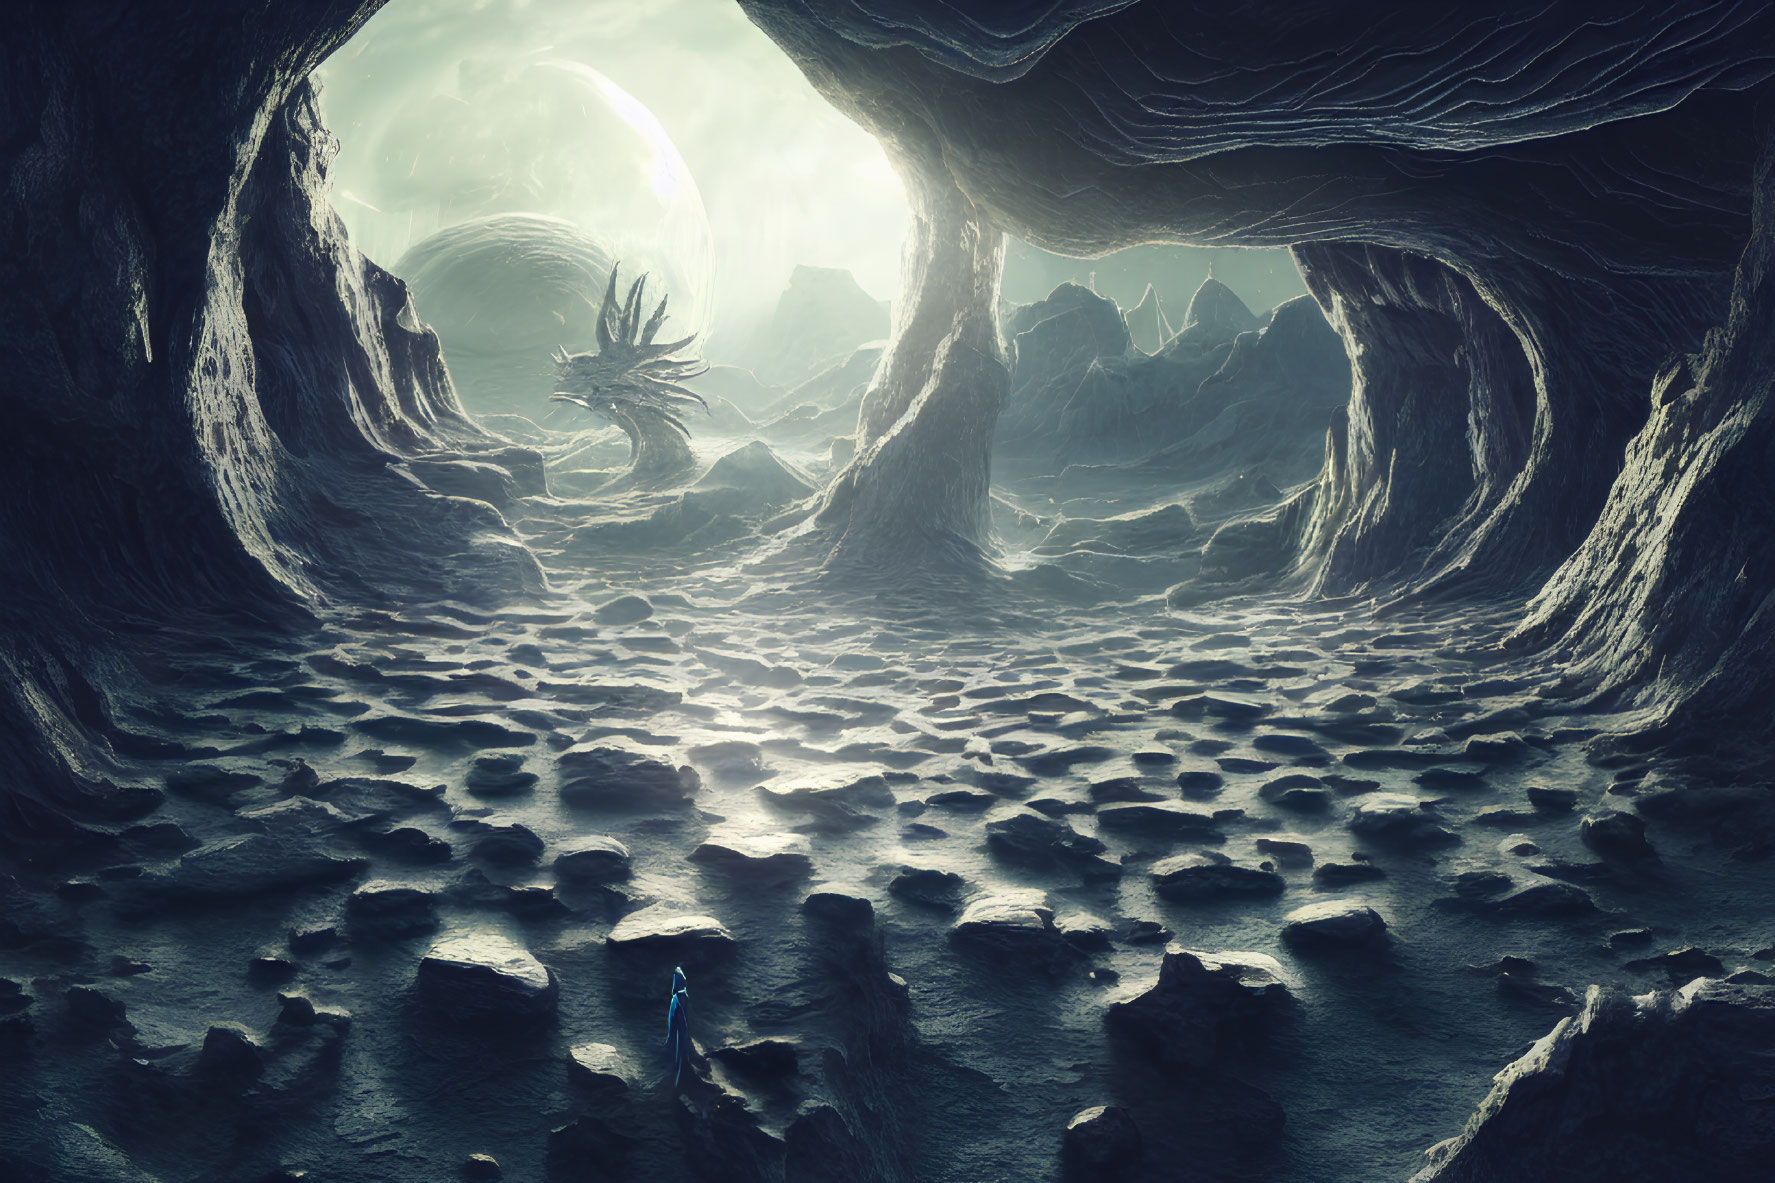 Alien cave with humanoid figure and distant creature under celestial sky